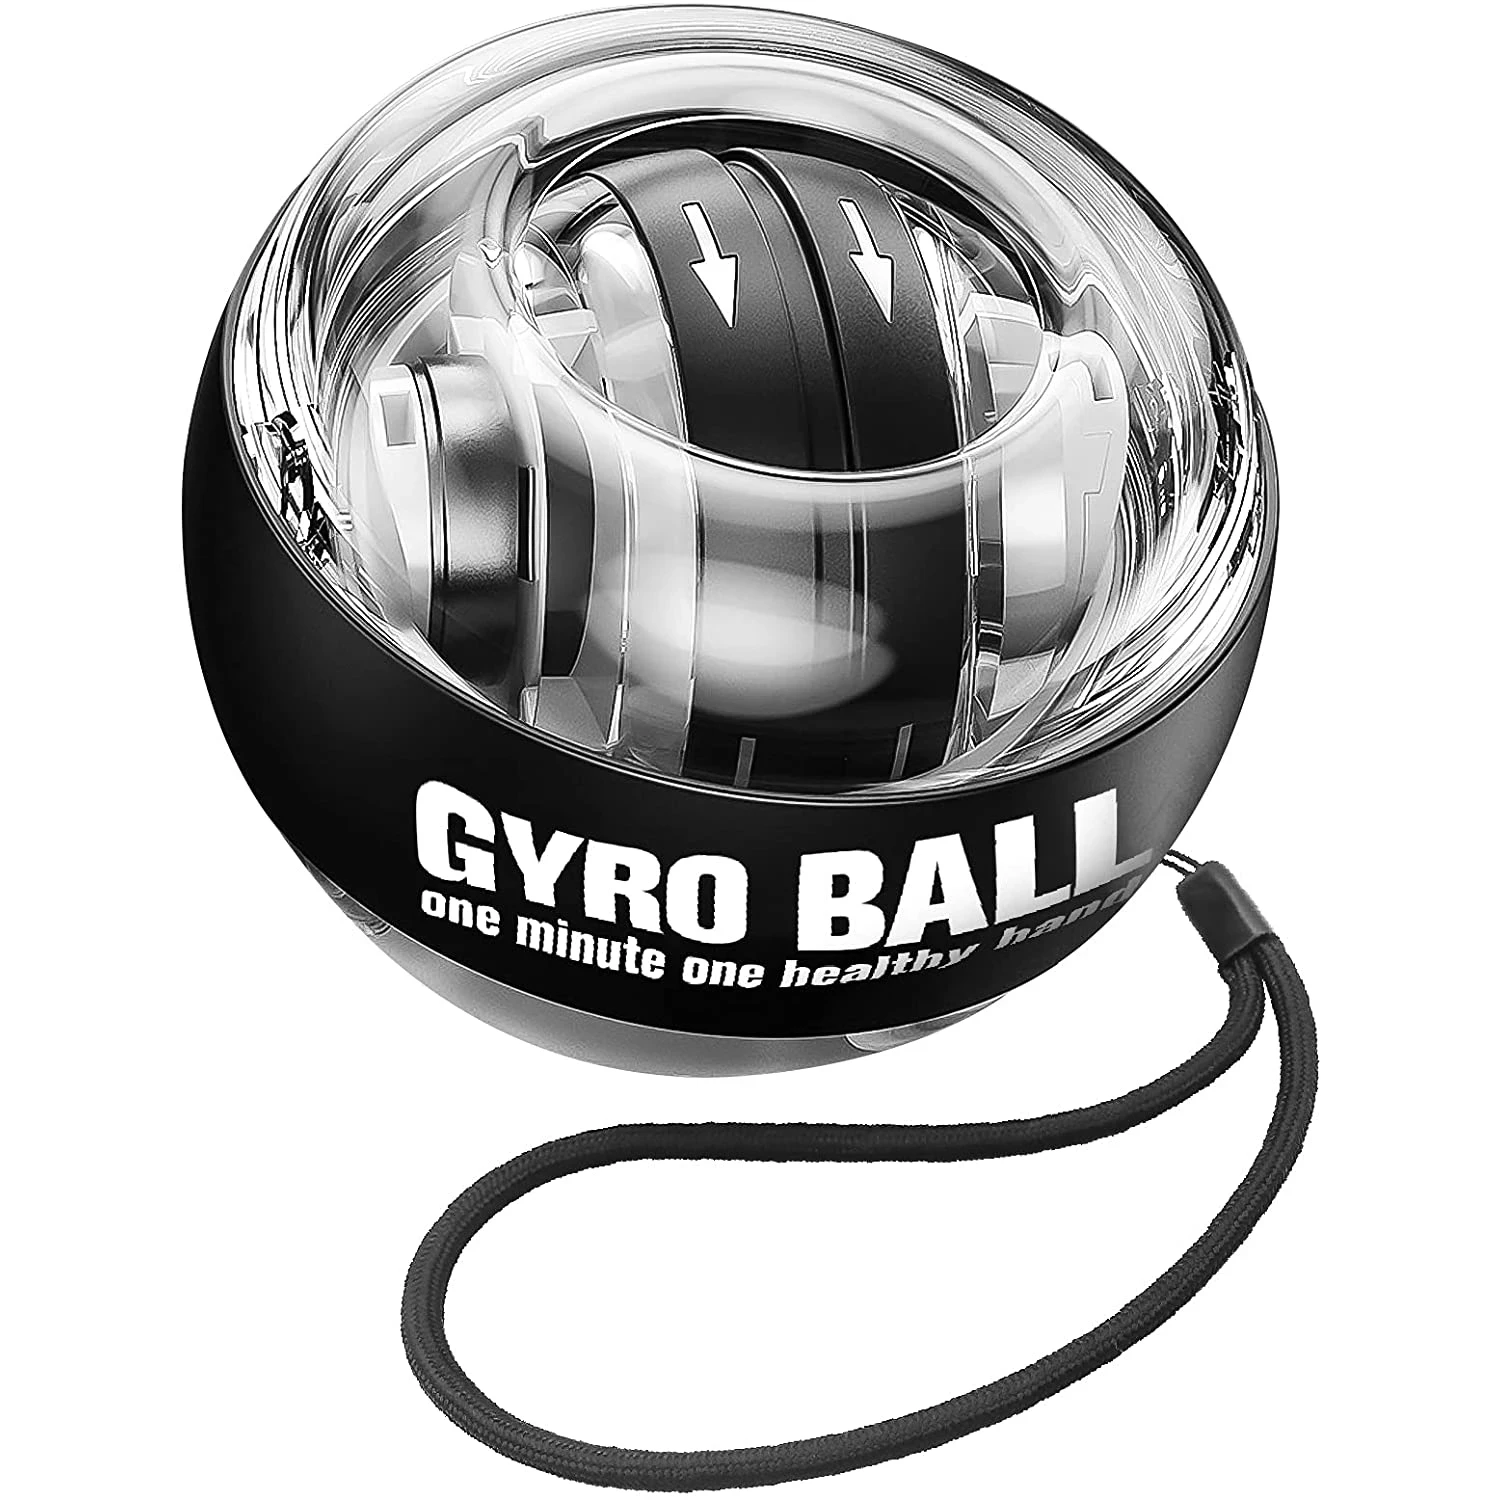 

LED Wrist Ball Self-starting Gyroscope Powerball Gyro Power Hand Ball Muscle Relax Arm Wrist Forc Trainer Fitnes Sport Equipment